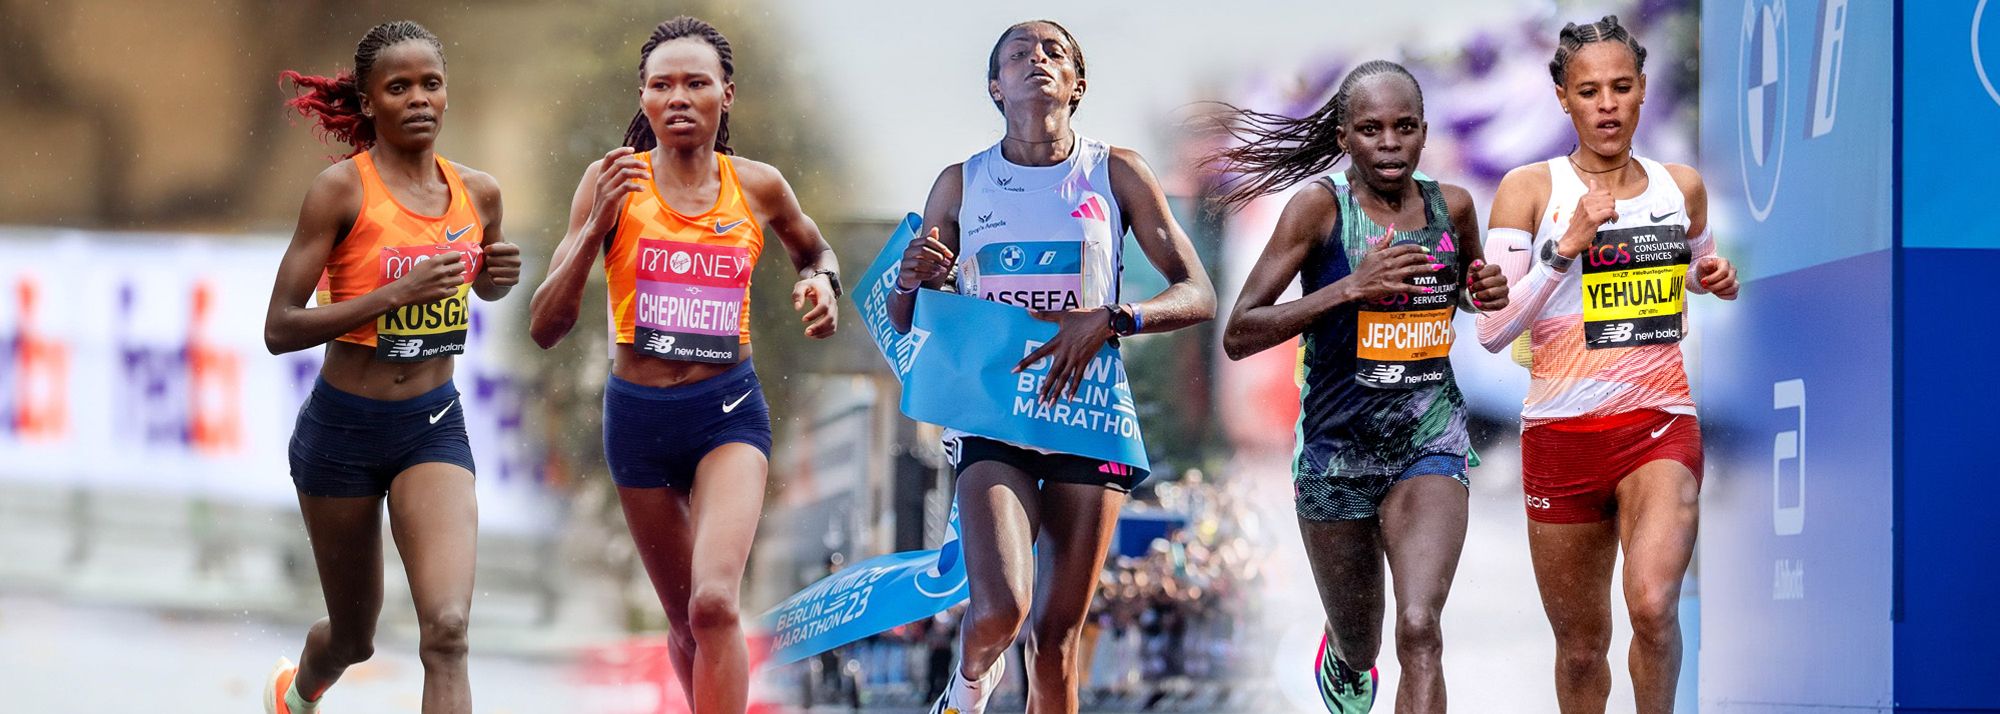 With three of the top four fastest women in history taking on several other stars of road racing, the TCS London Marathon could see something very special on Sunday